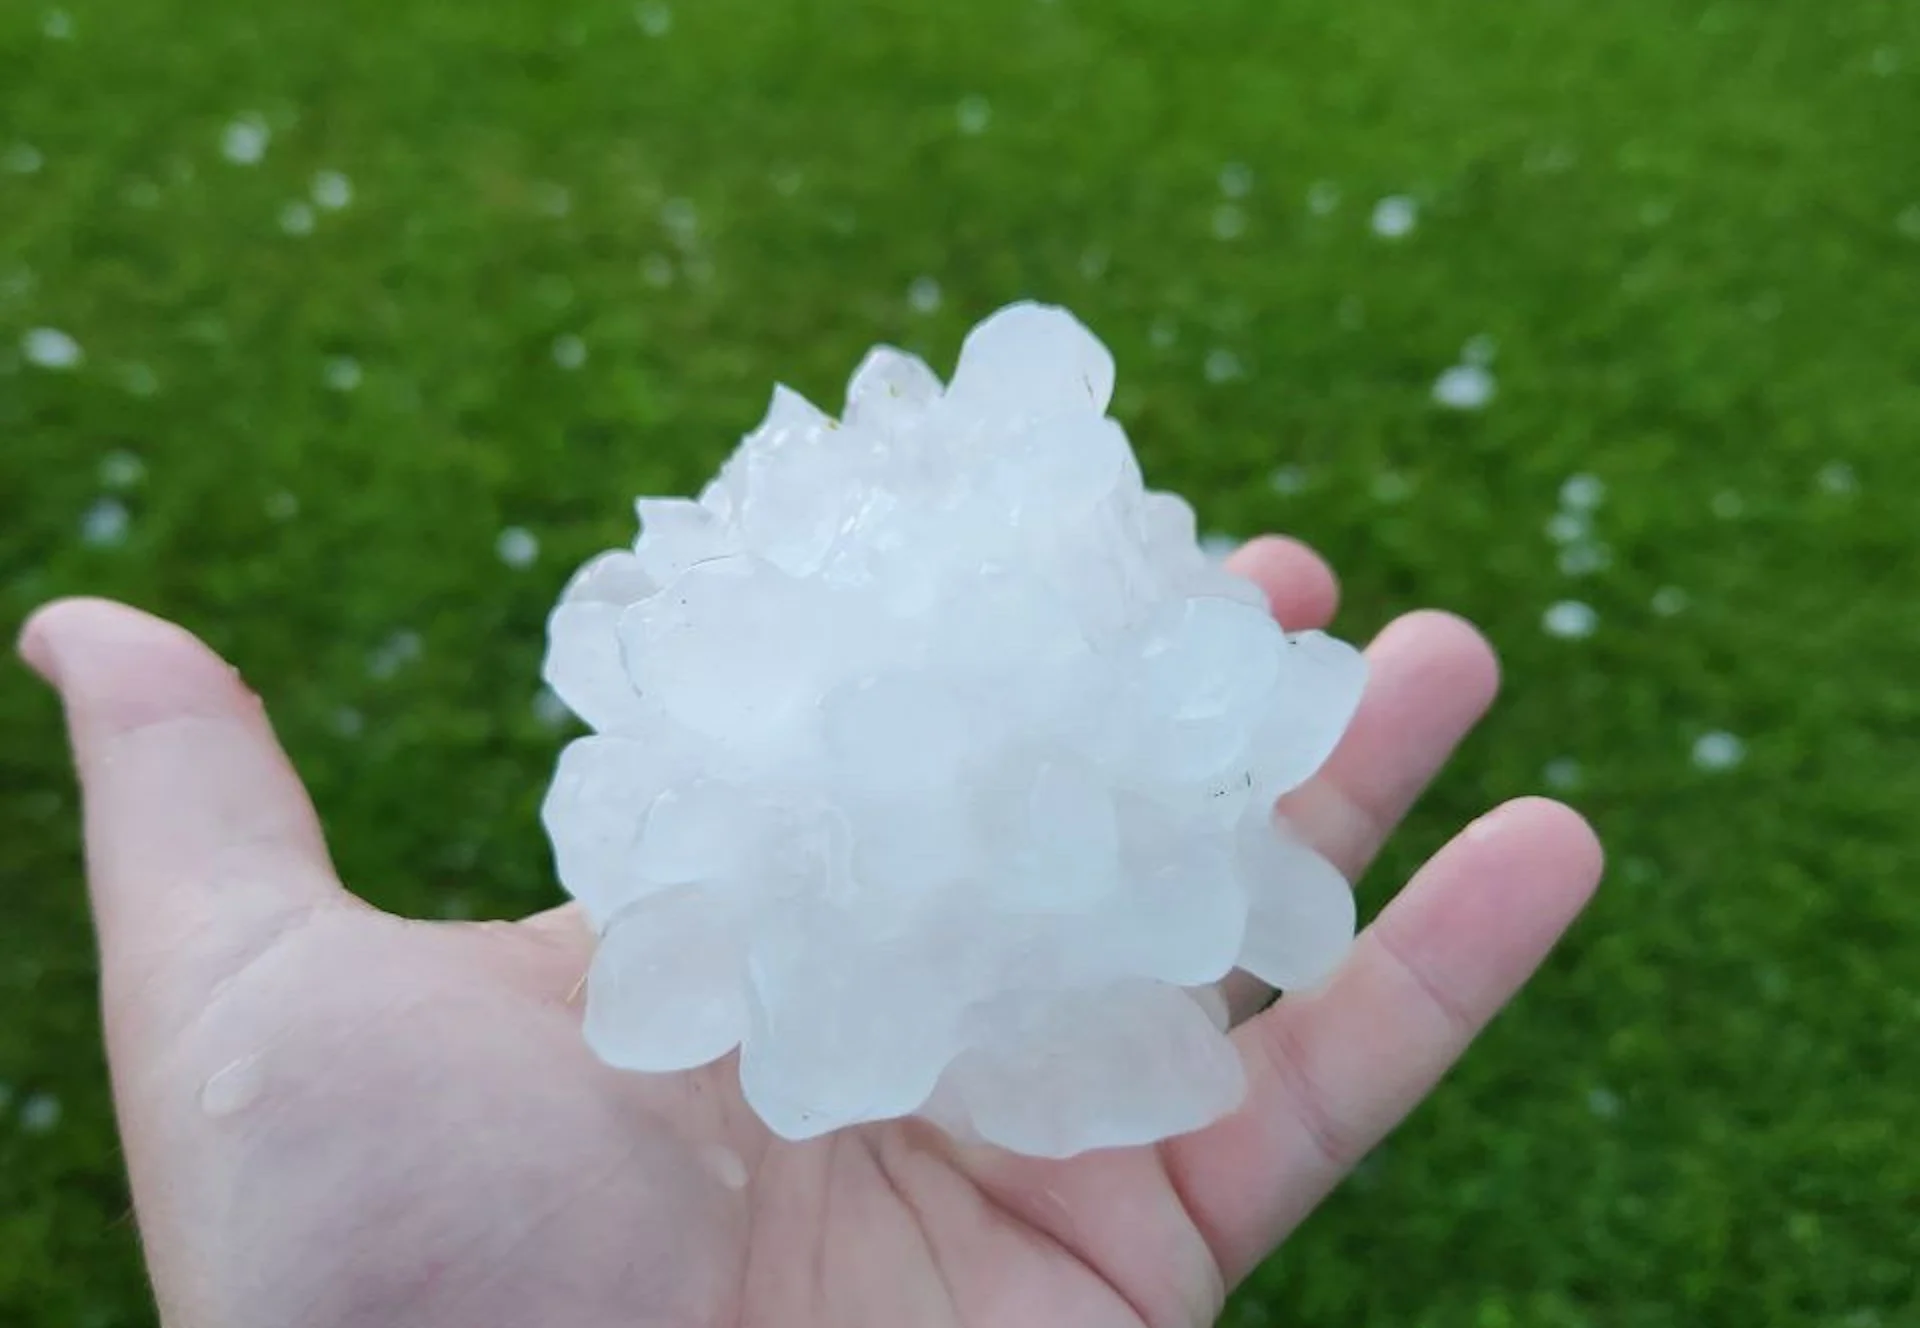 PHOTOS: Severe storms hit southern Ontario with hail, damaging winds